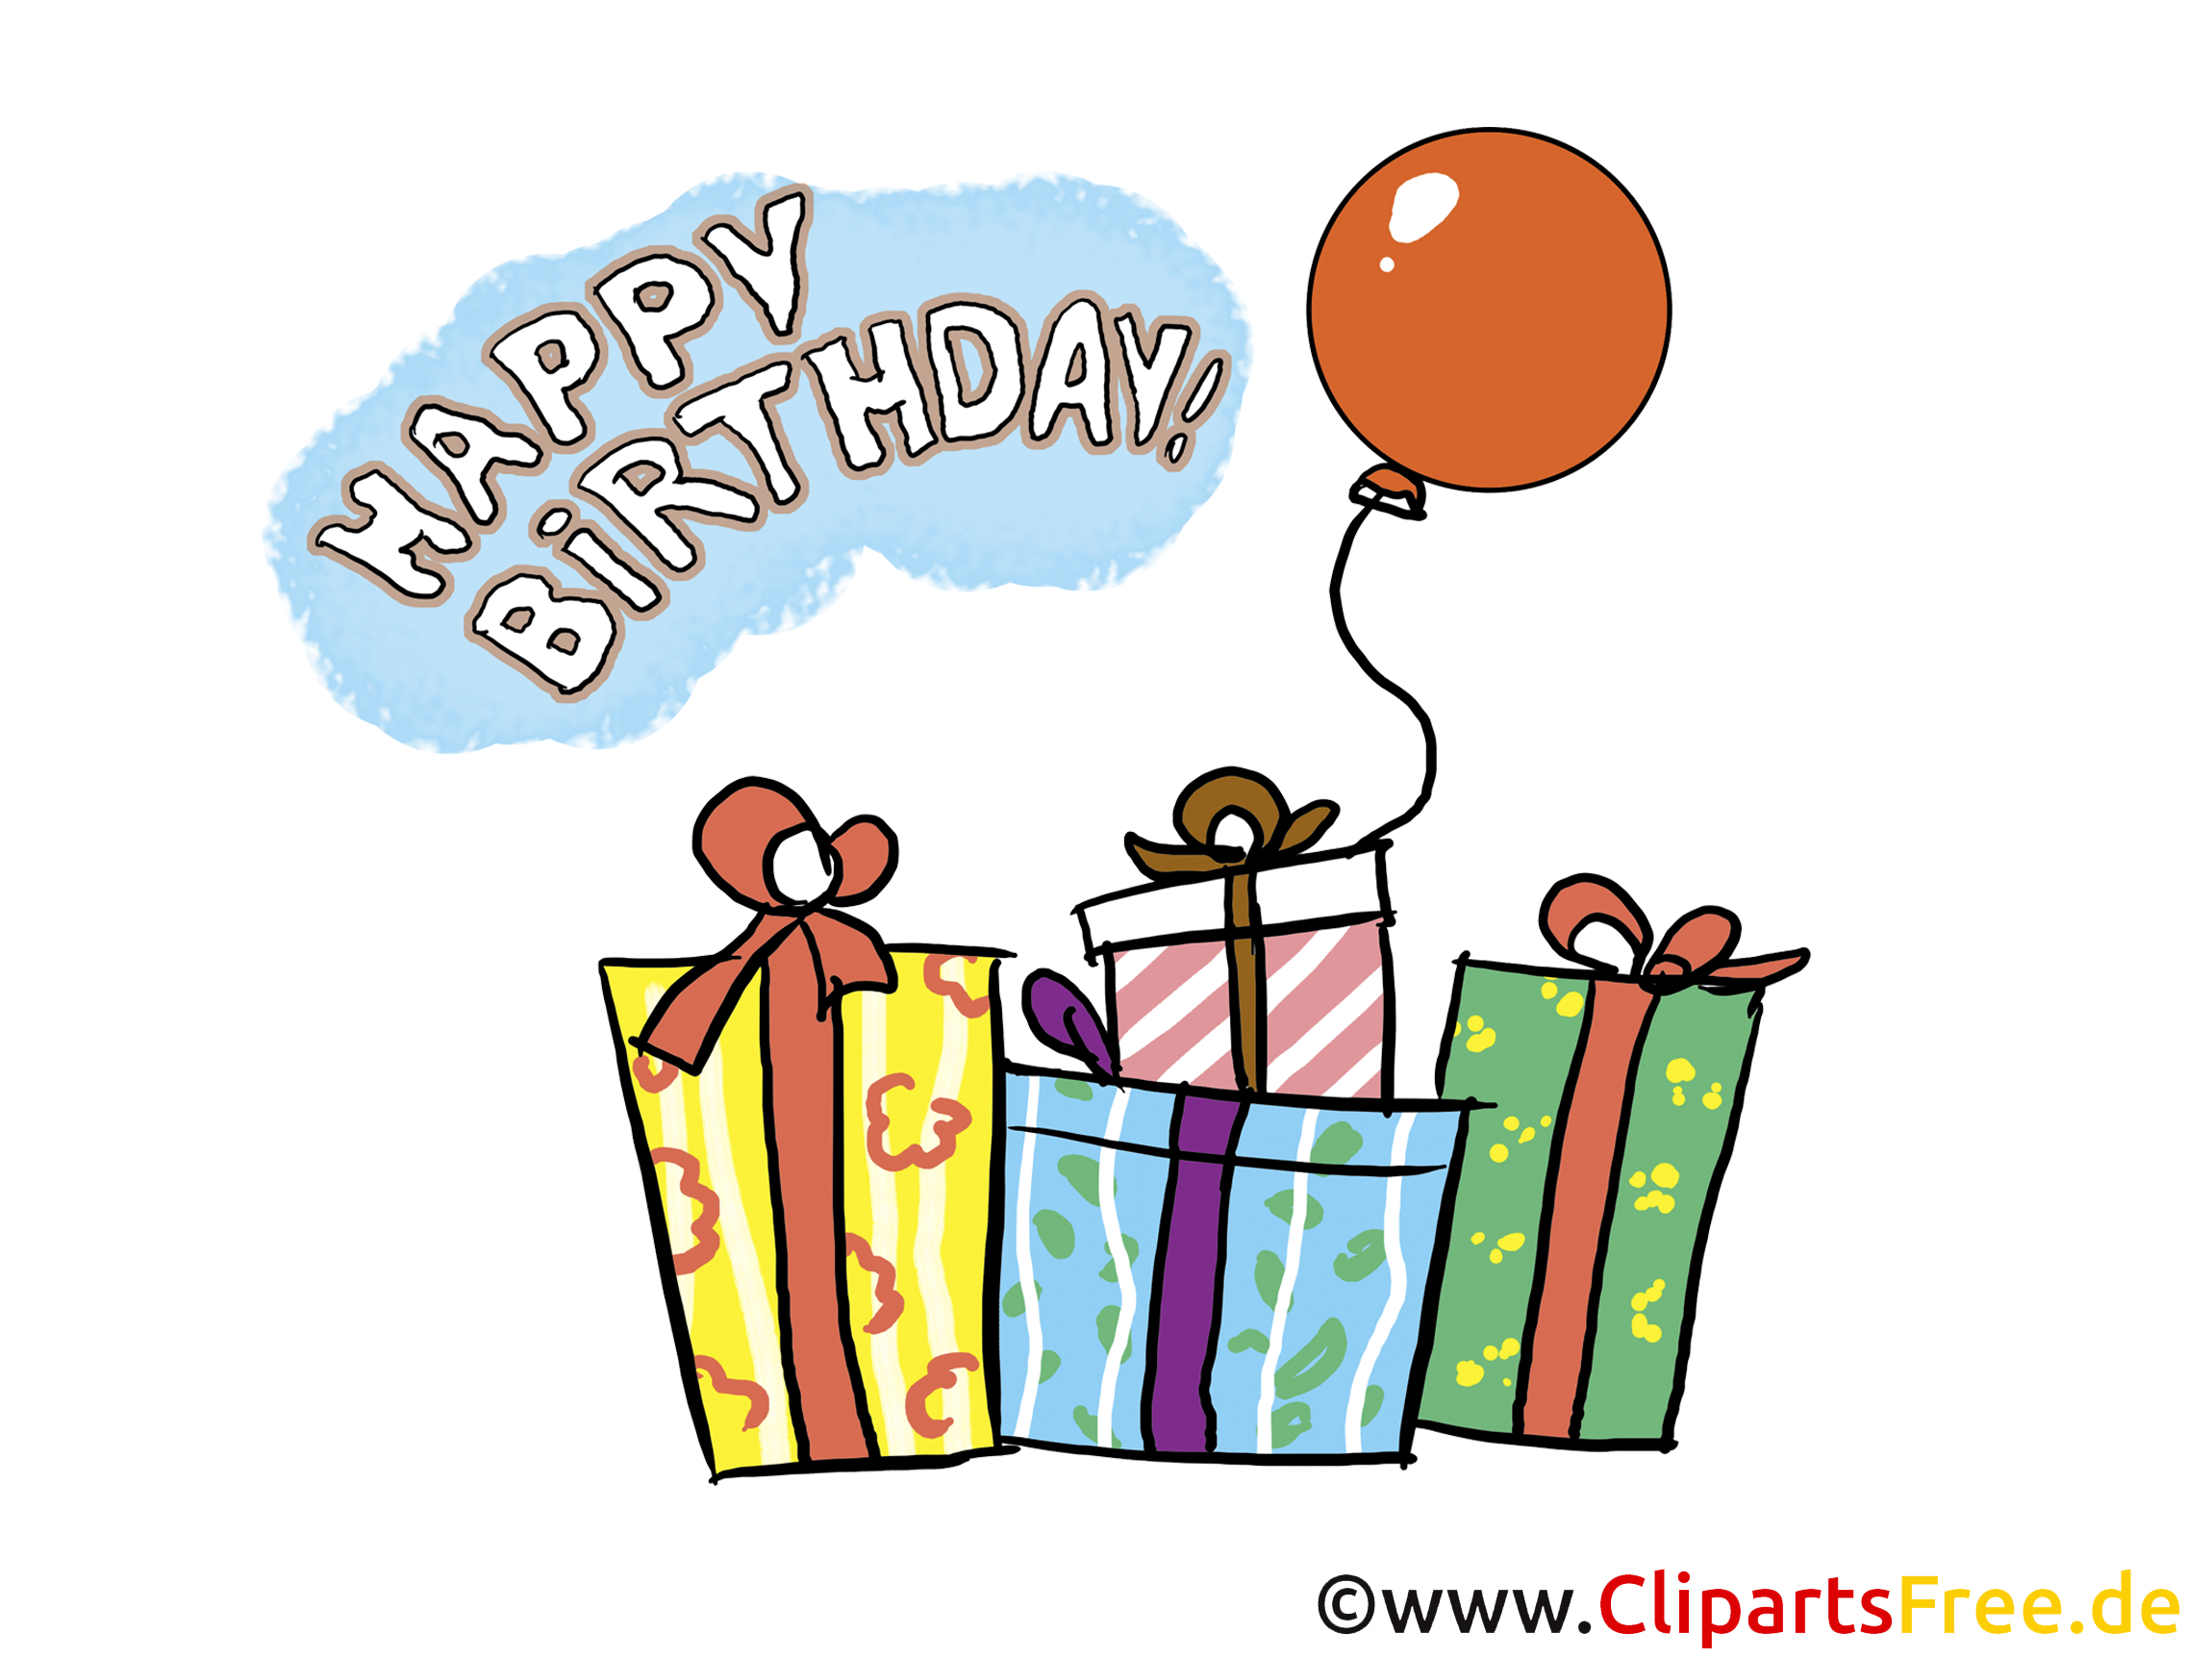 Happy Birthday Clip Art, free images collection, illustration, free clipart, ...